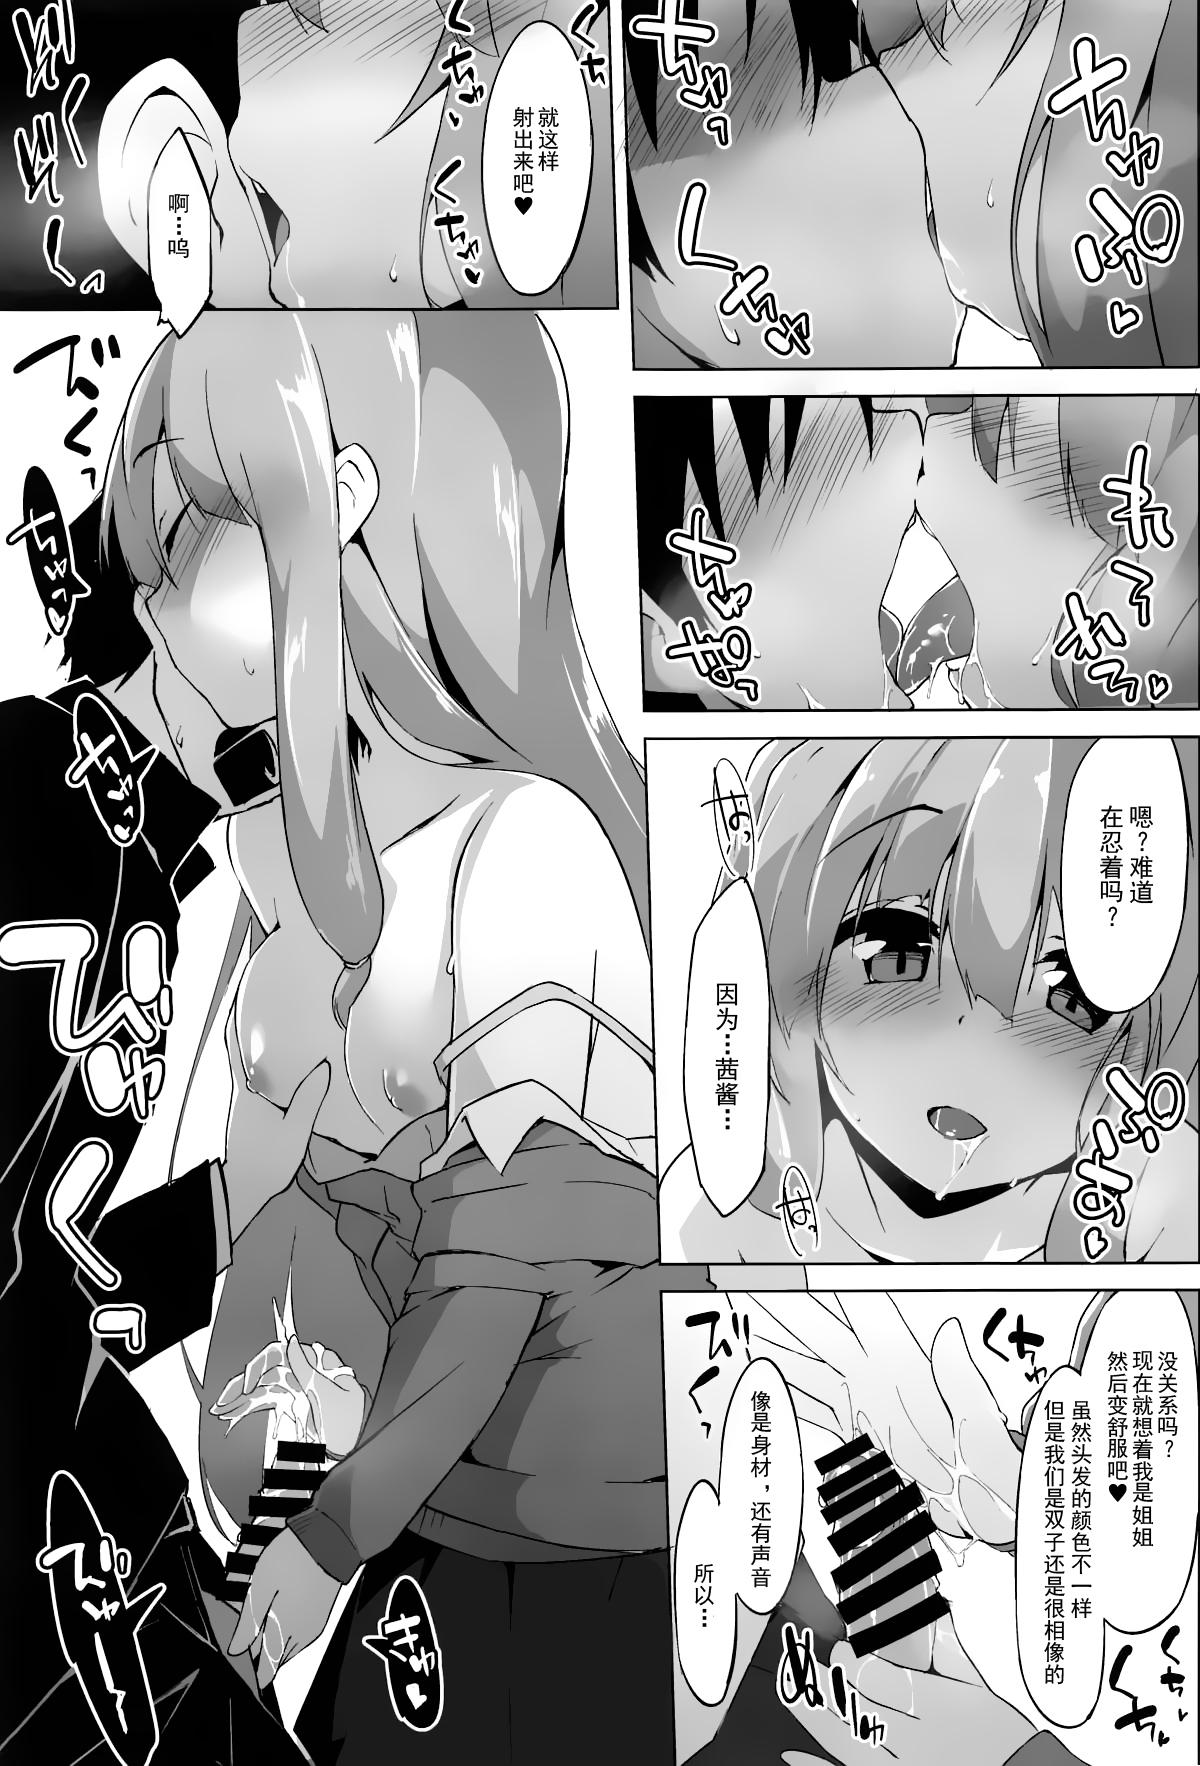 Fisting Himegoto Shimai - Voiceroid Jerk Off - Page 7